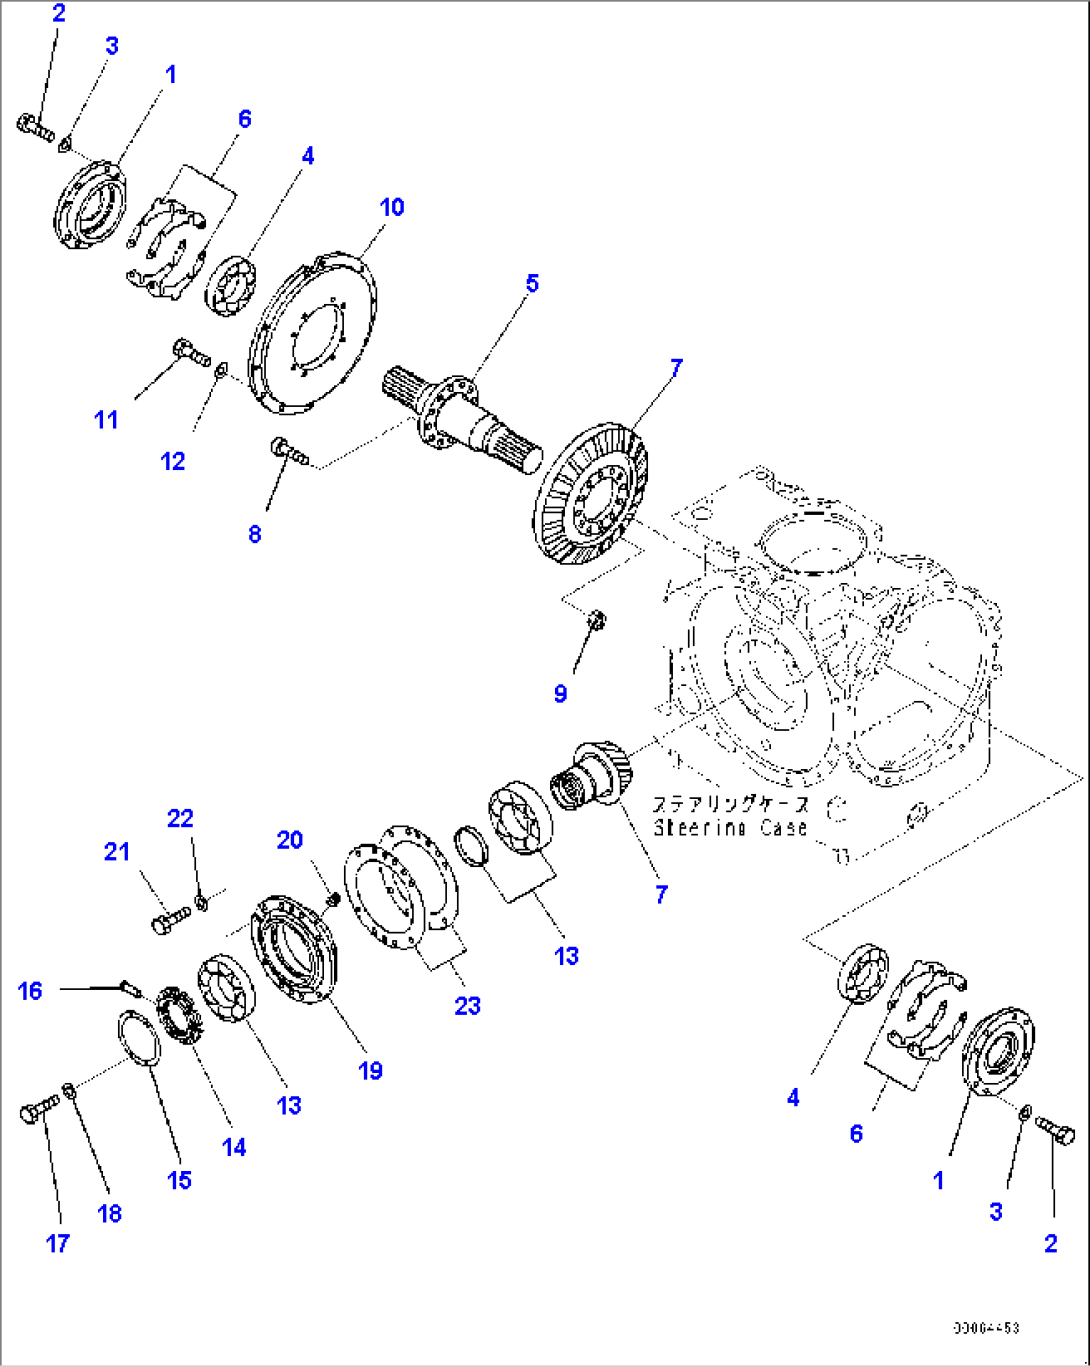 Power Train, Bevel Gear and Shaft (#85077-)